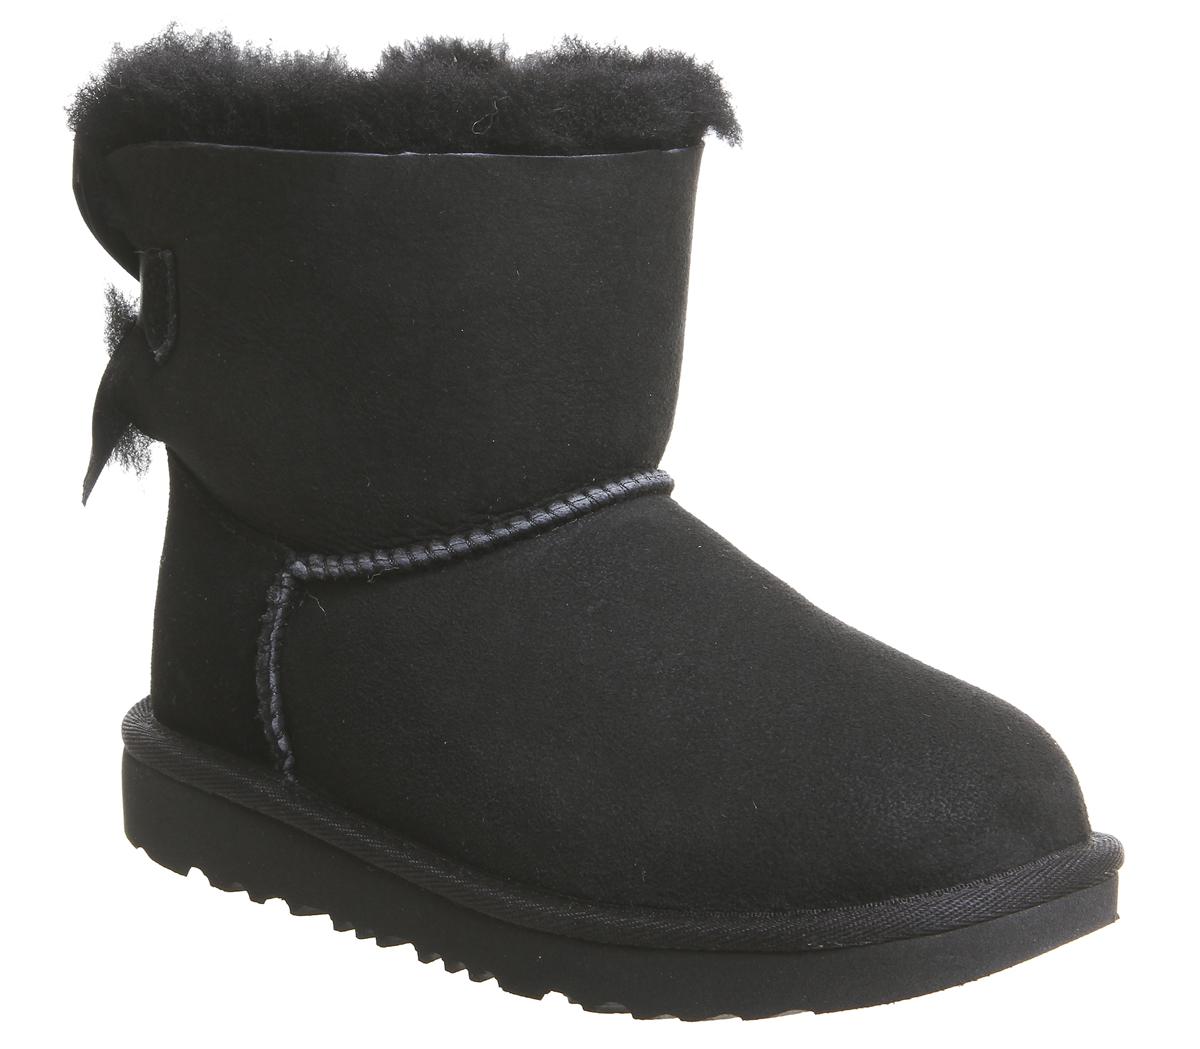 all black uggs with bows